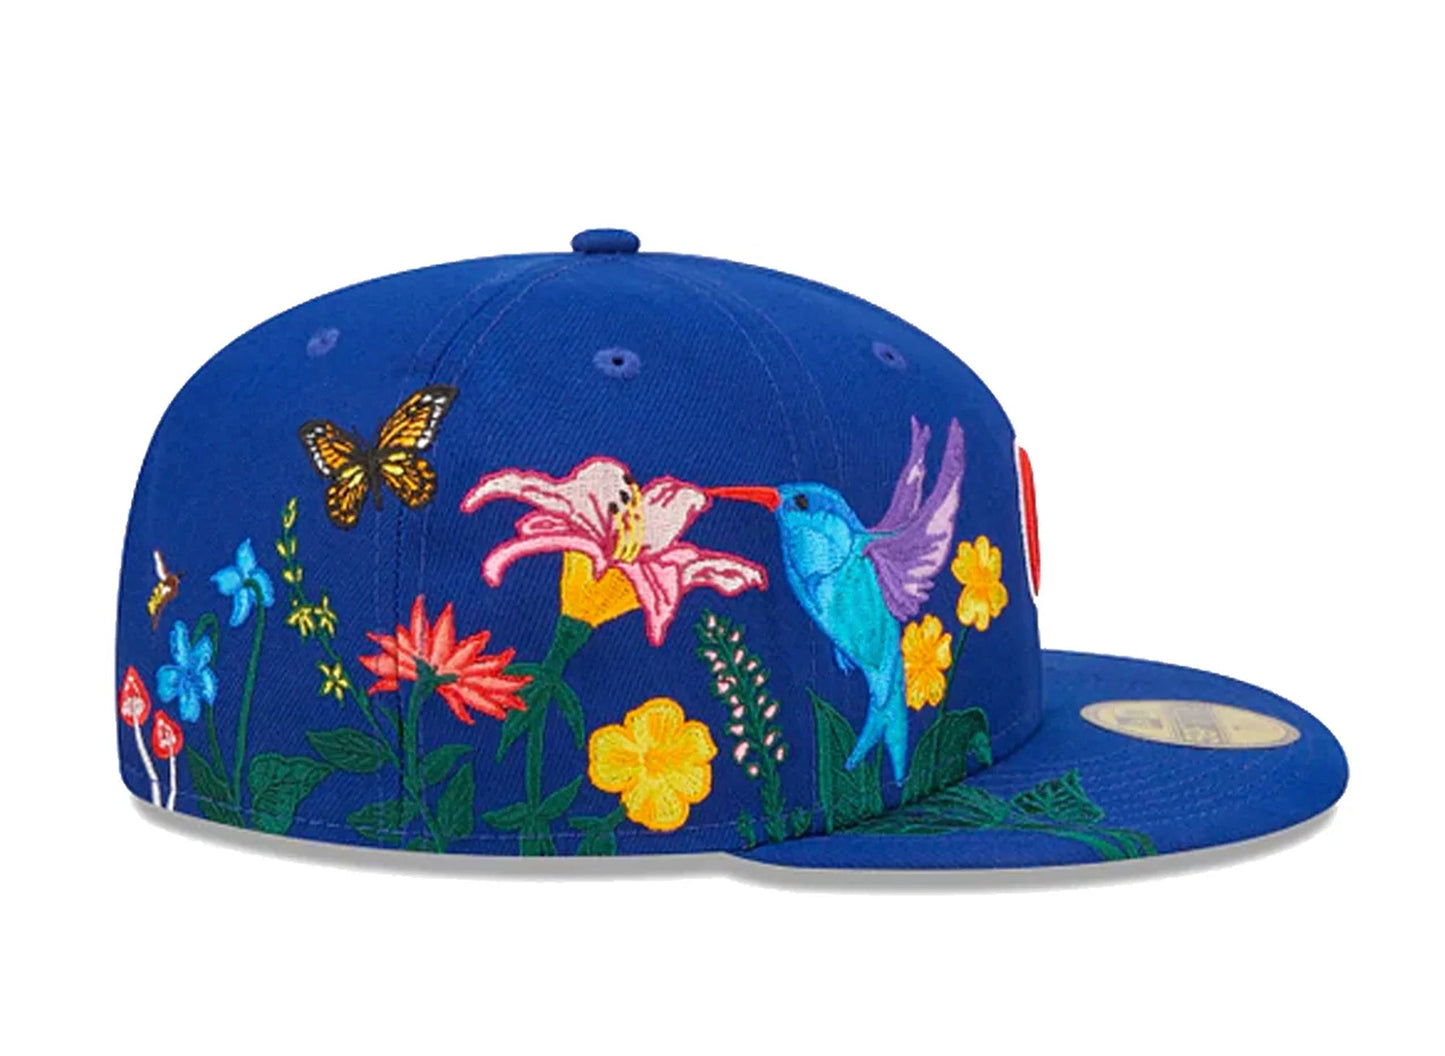 New Era Blooming Chicago Cubs Hat